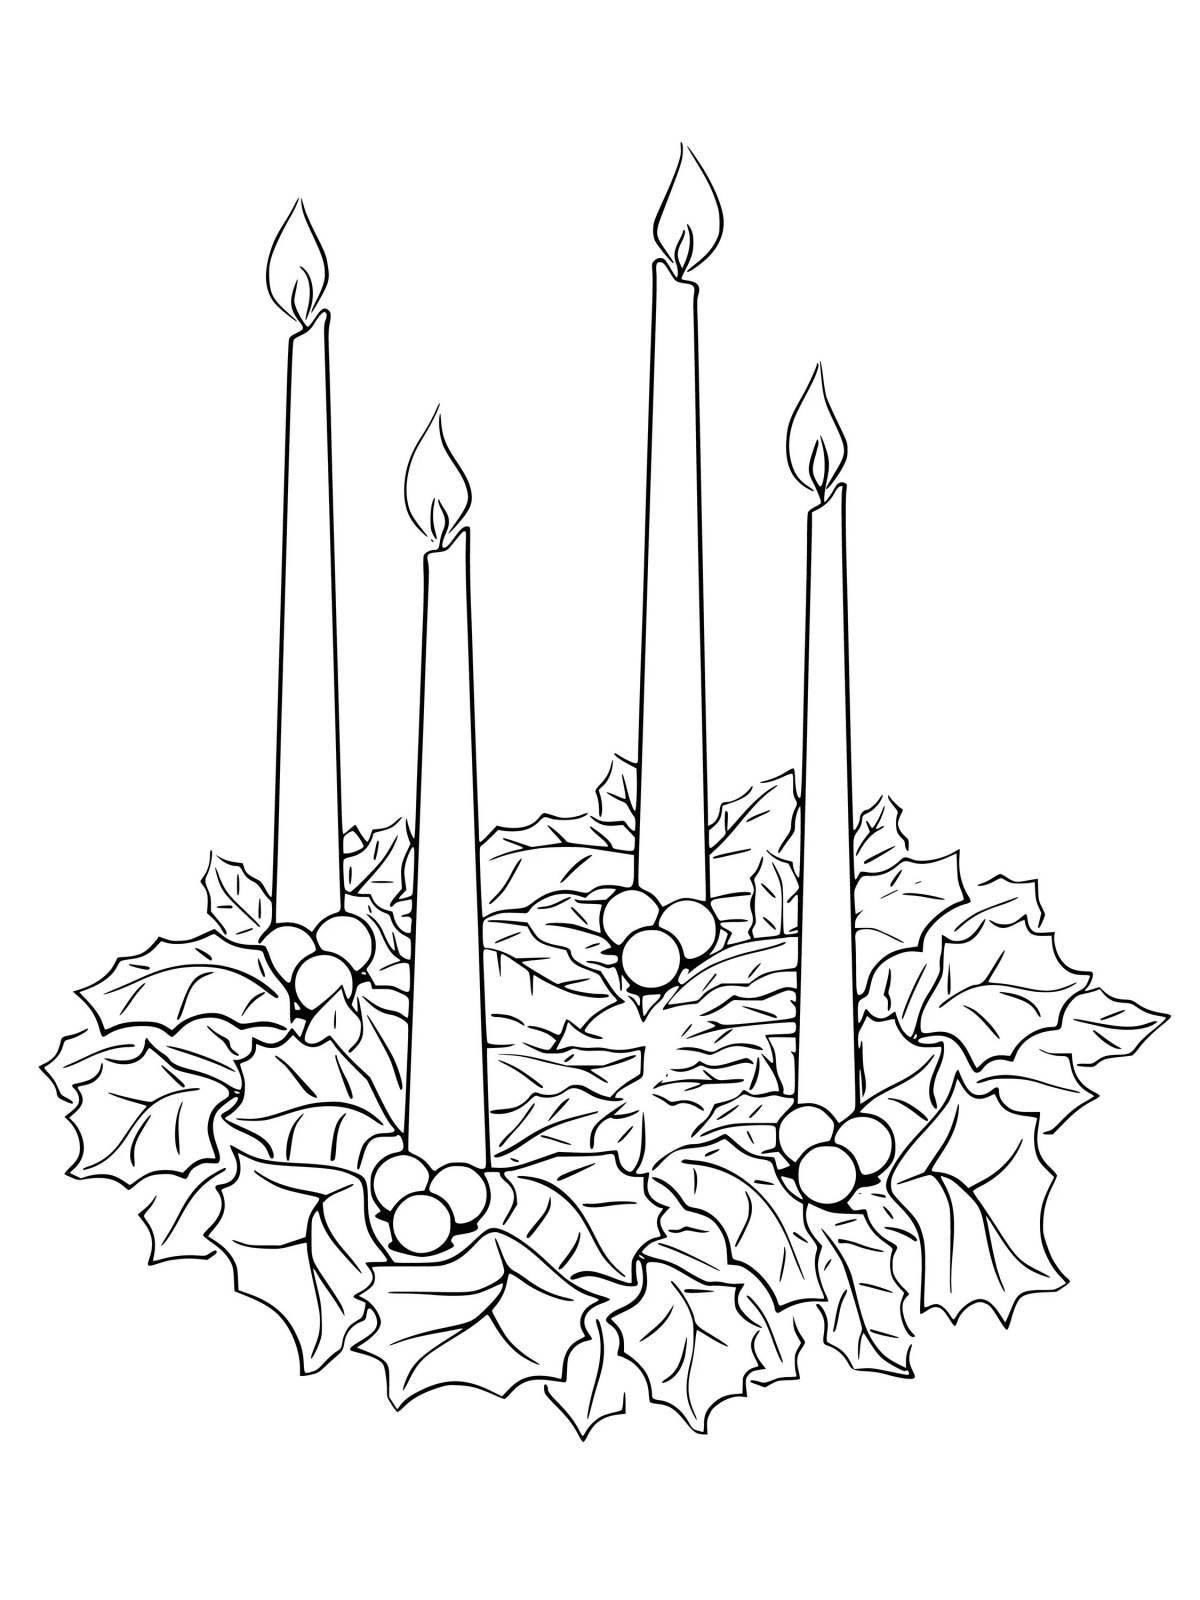 Majestic Christmas candle coloring page